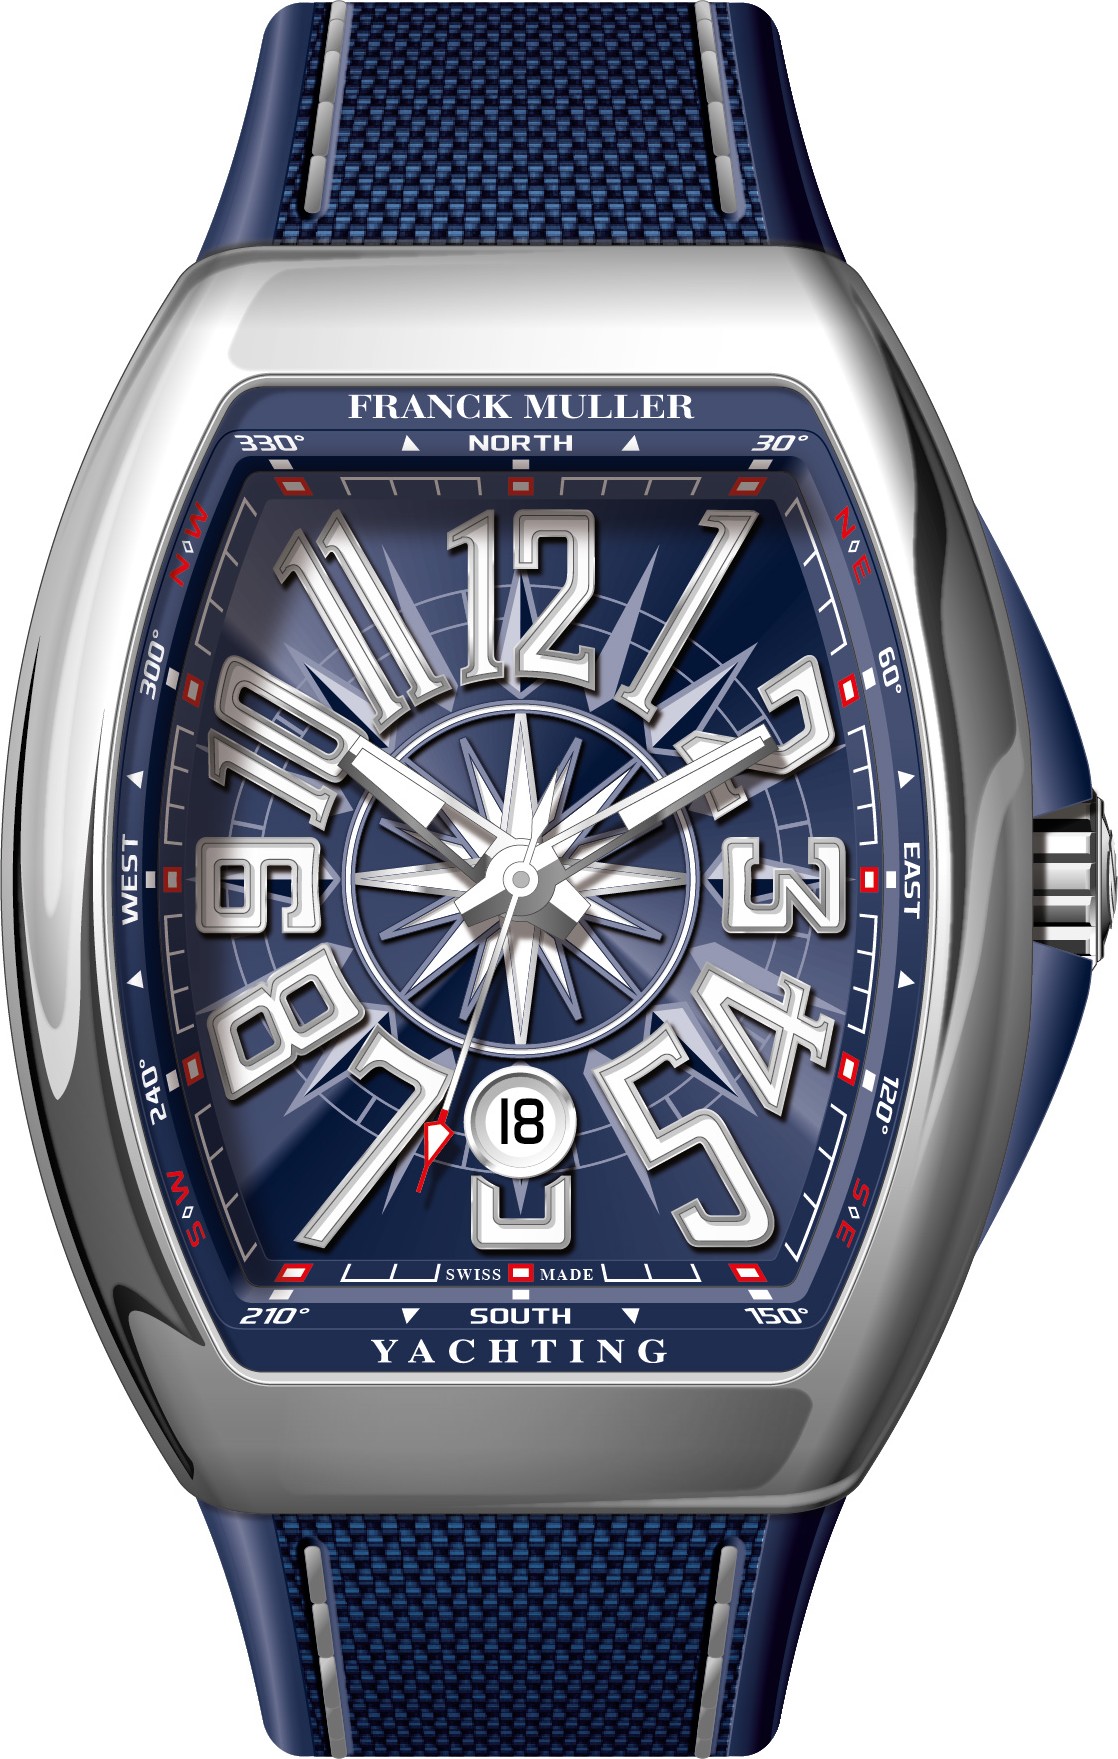 yachting watches